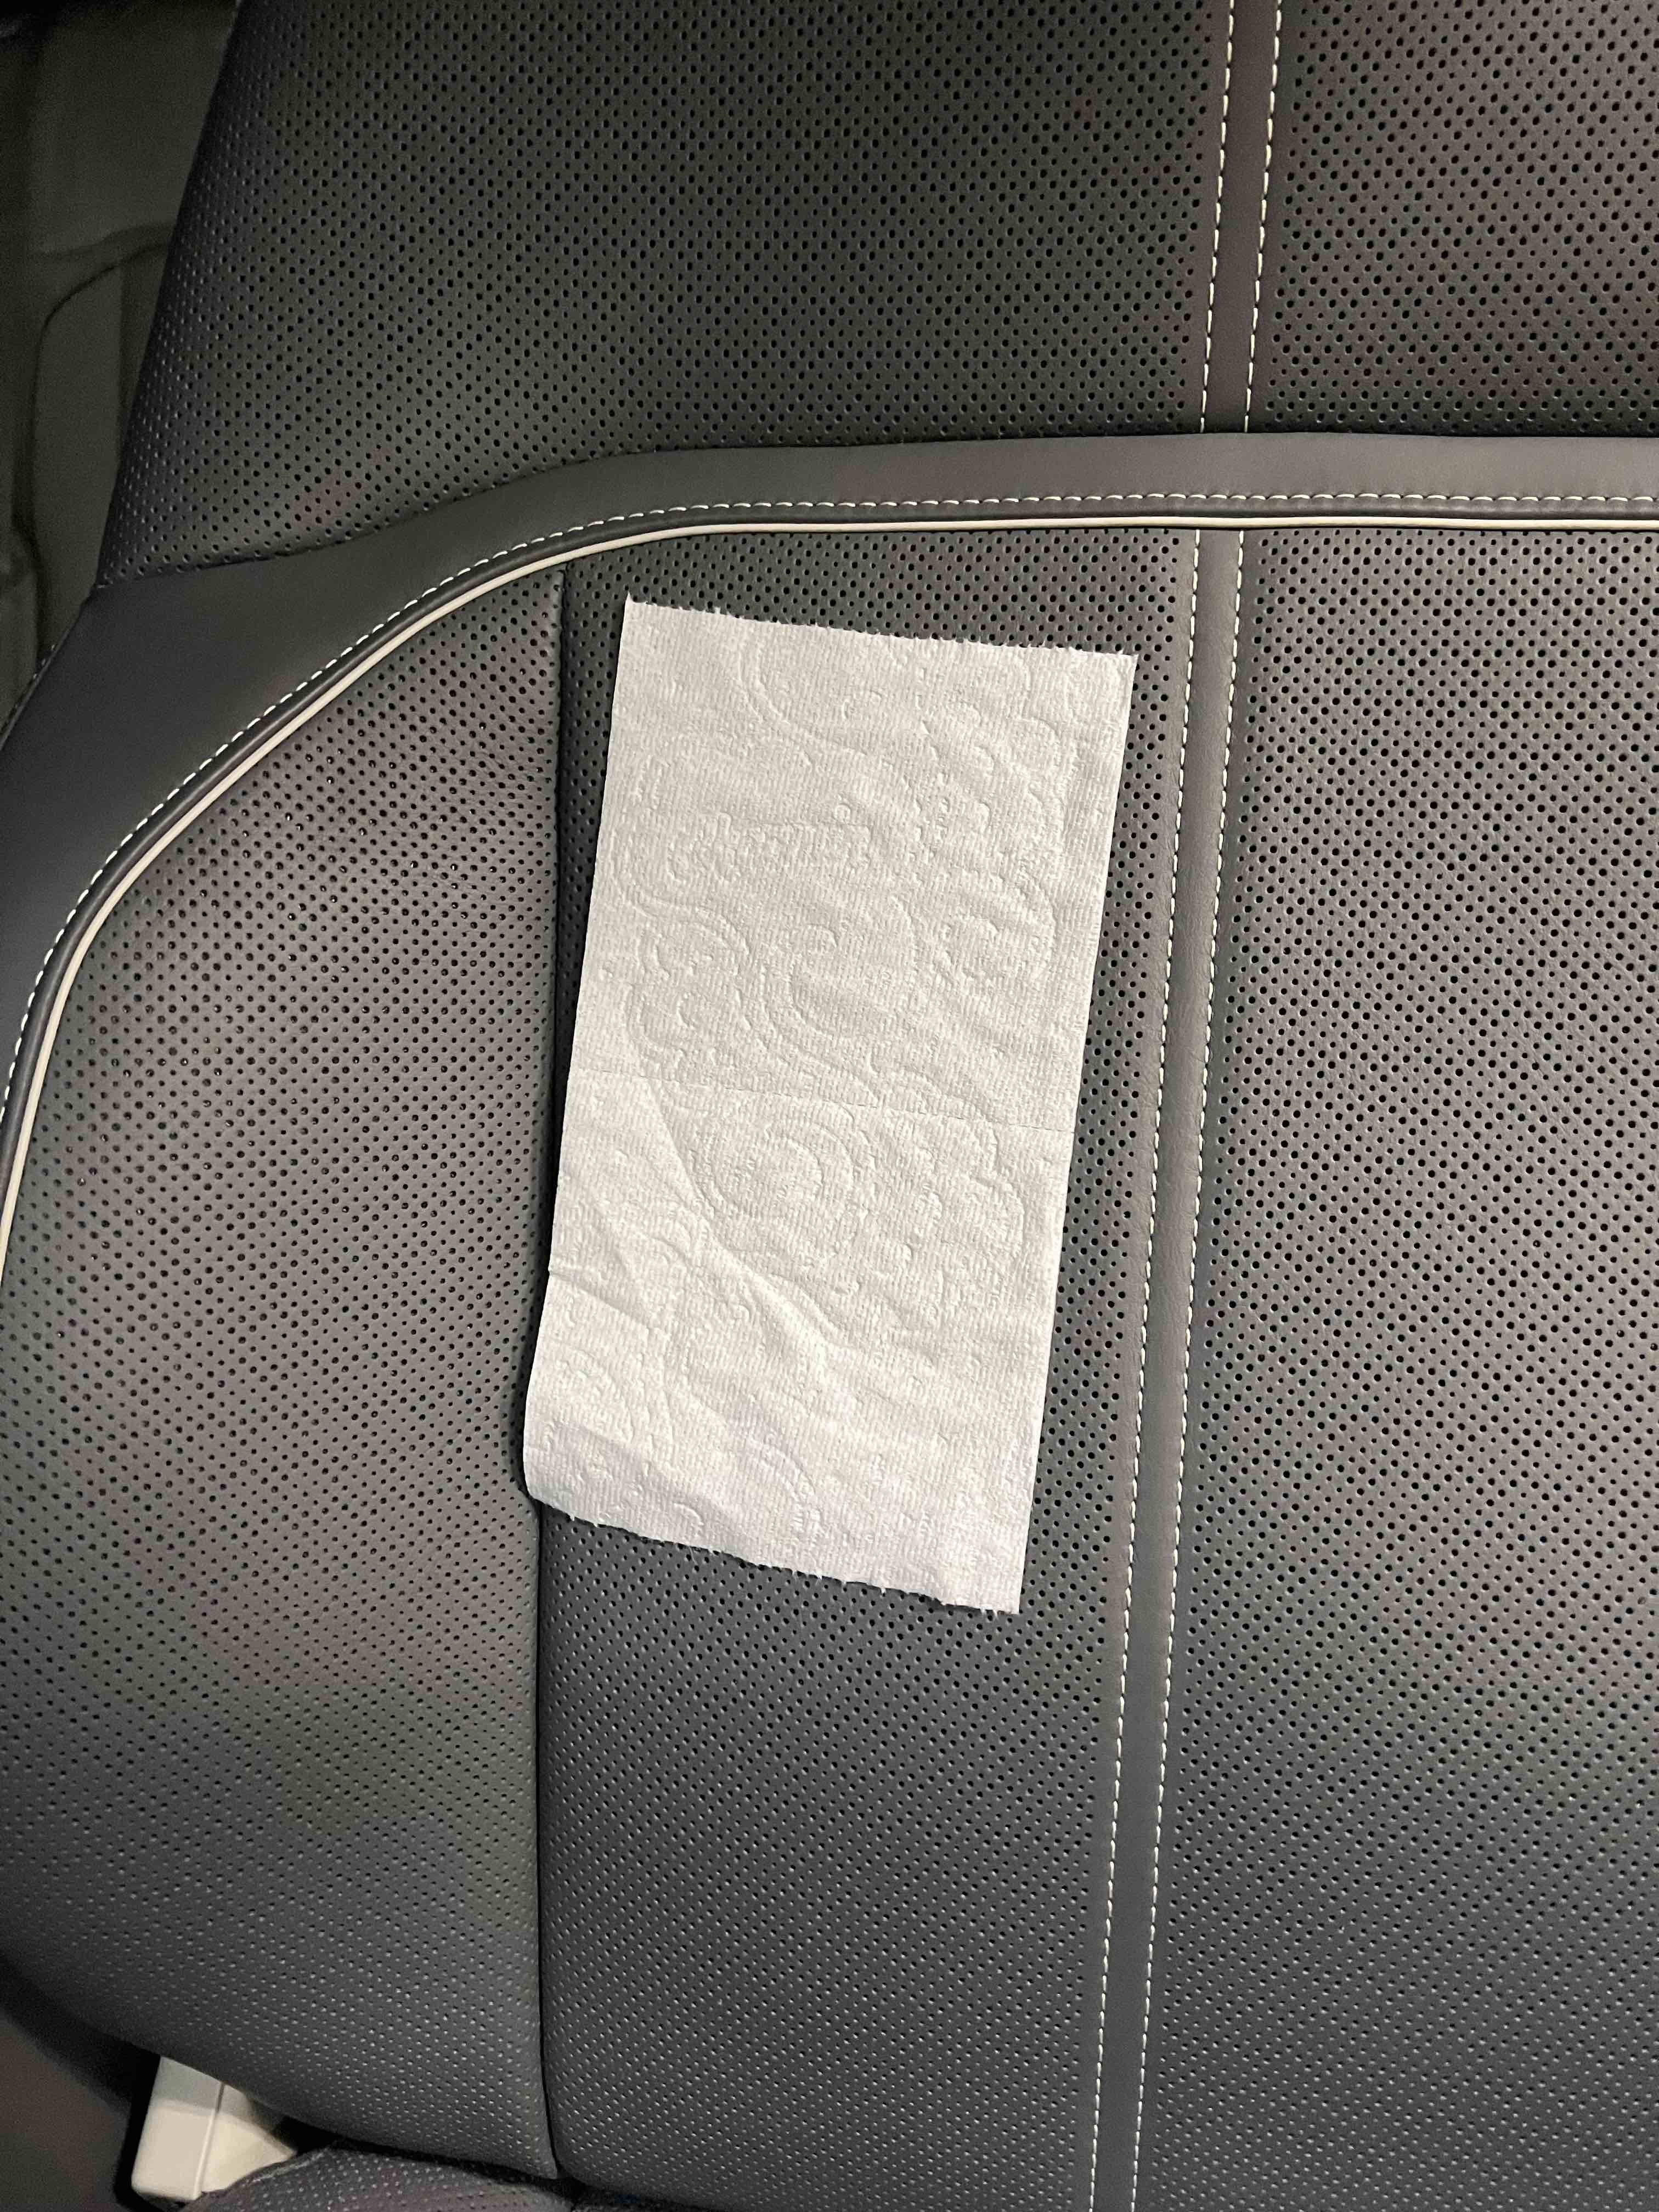 Toilet paper clinging to ventilated seat.jpg